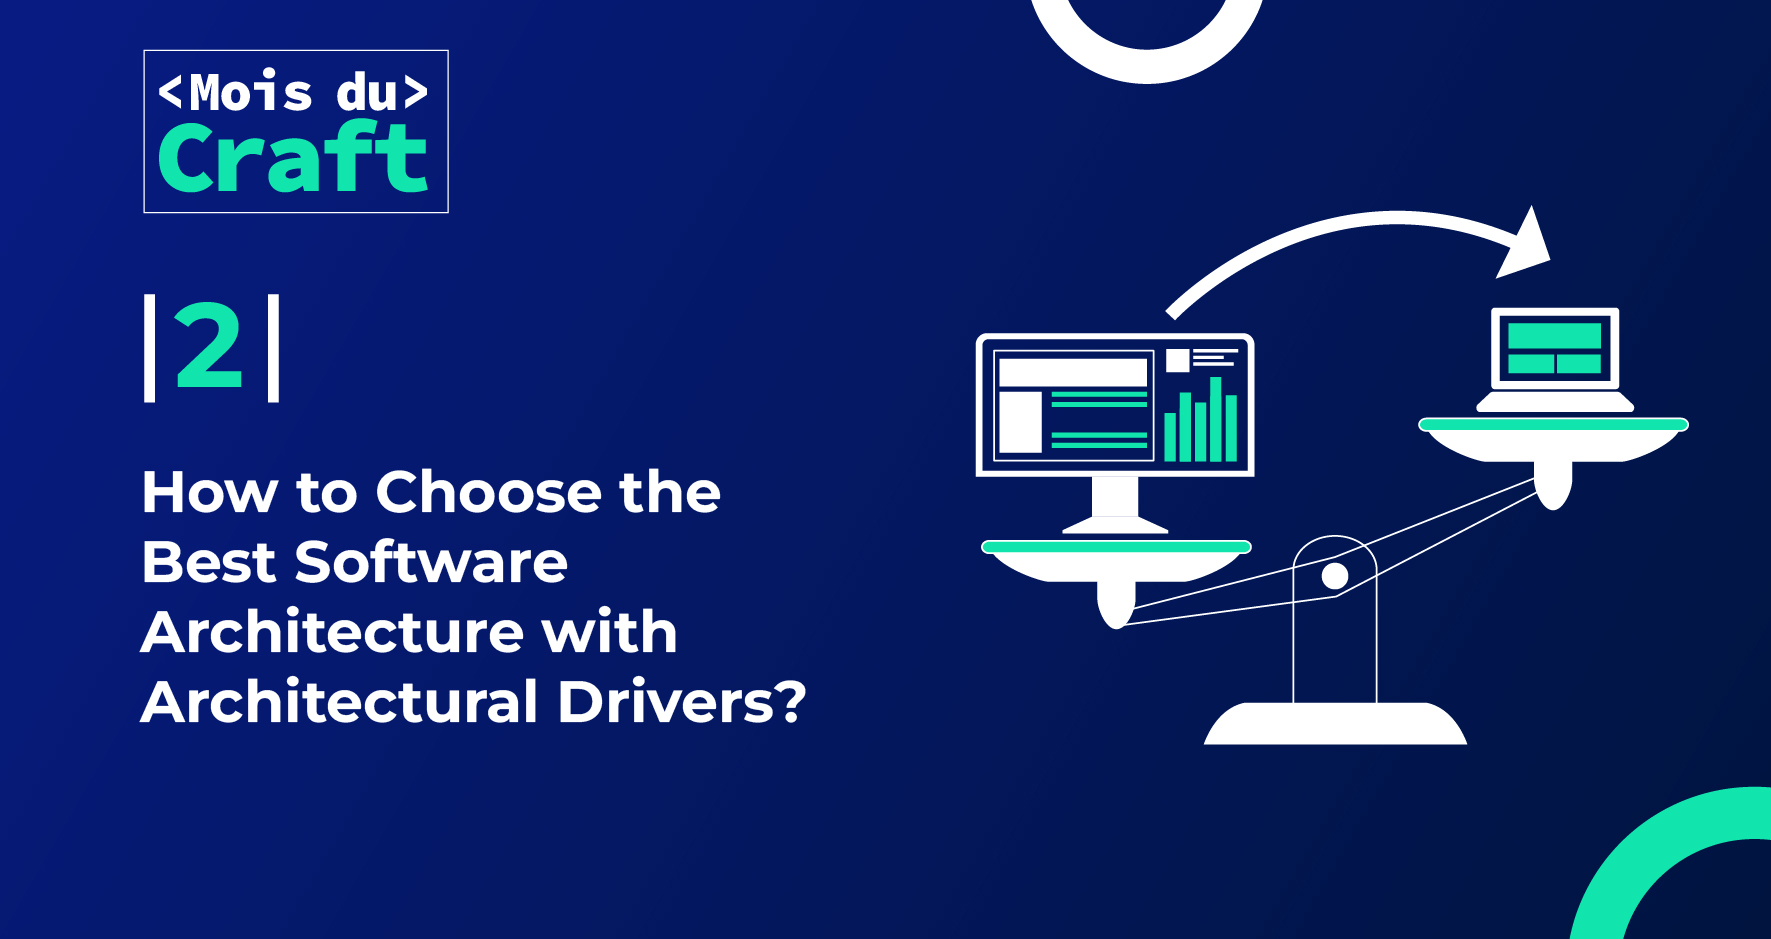 How to Choose the Best Software Architecture with Architectural Drivers?